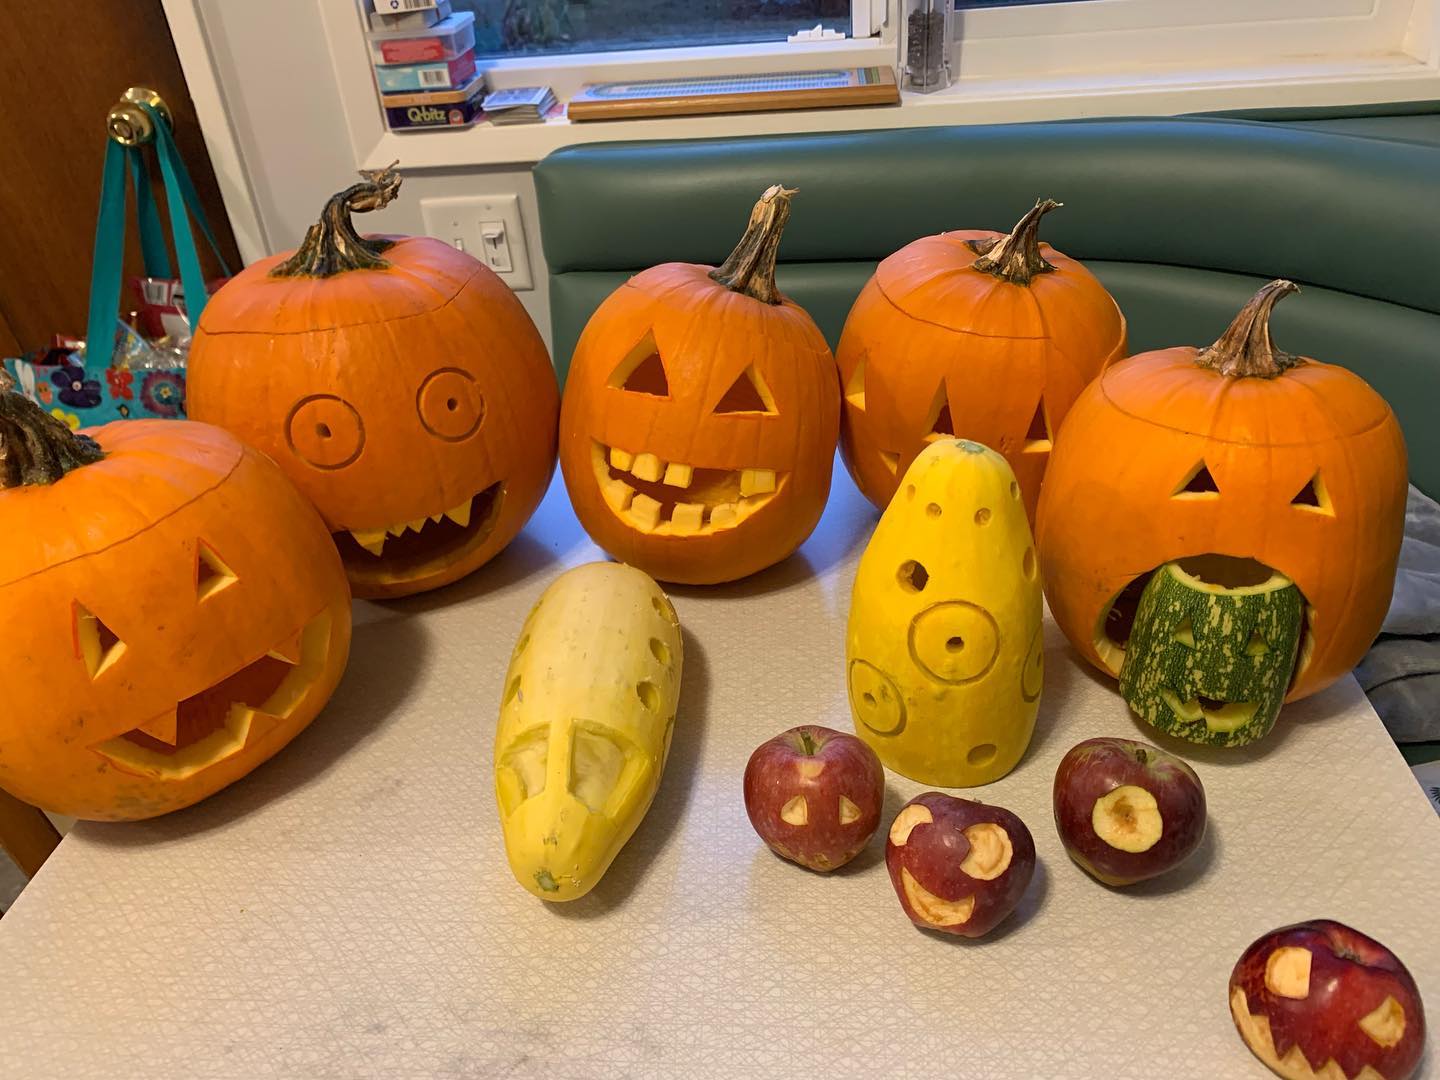 Pumpkins, and other thjngs, carved and ready for Halloween! #halloween #pumpkins #gourds #apples #jackolantern